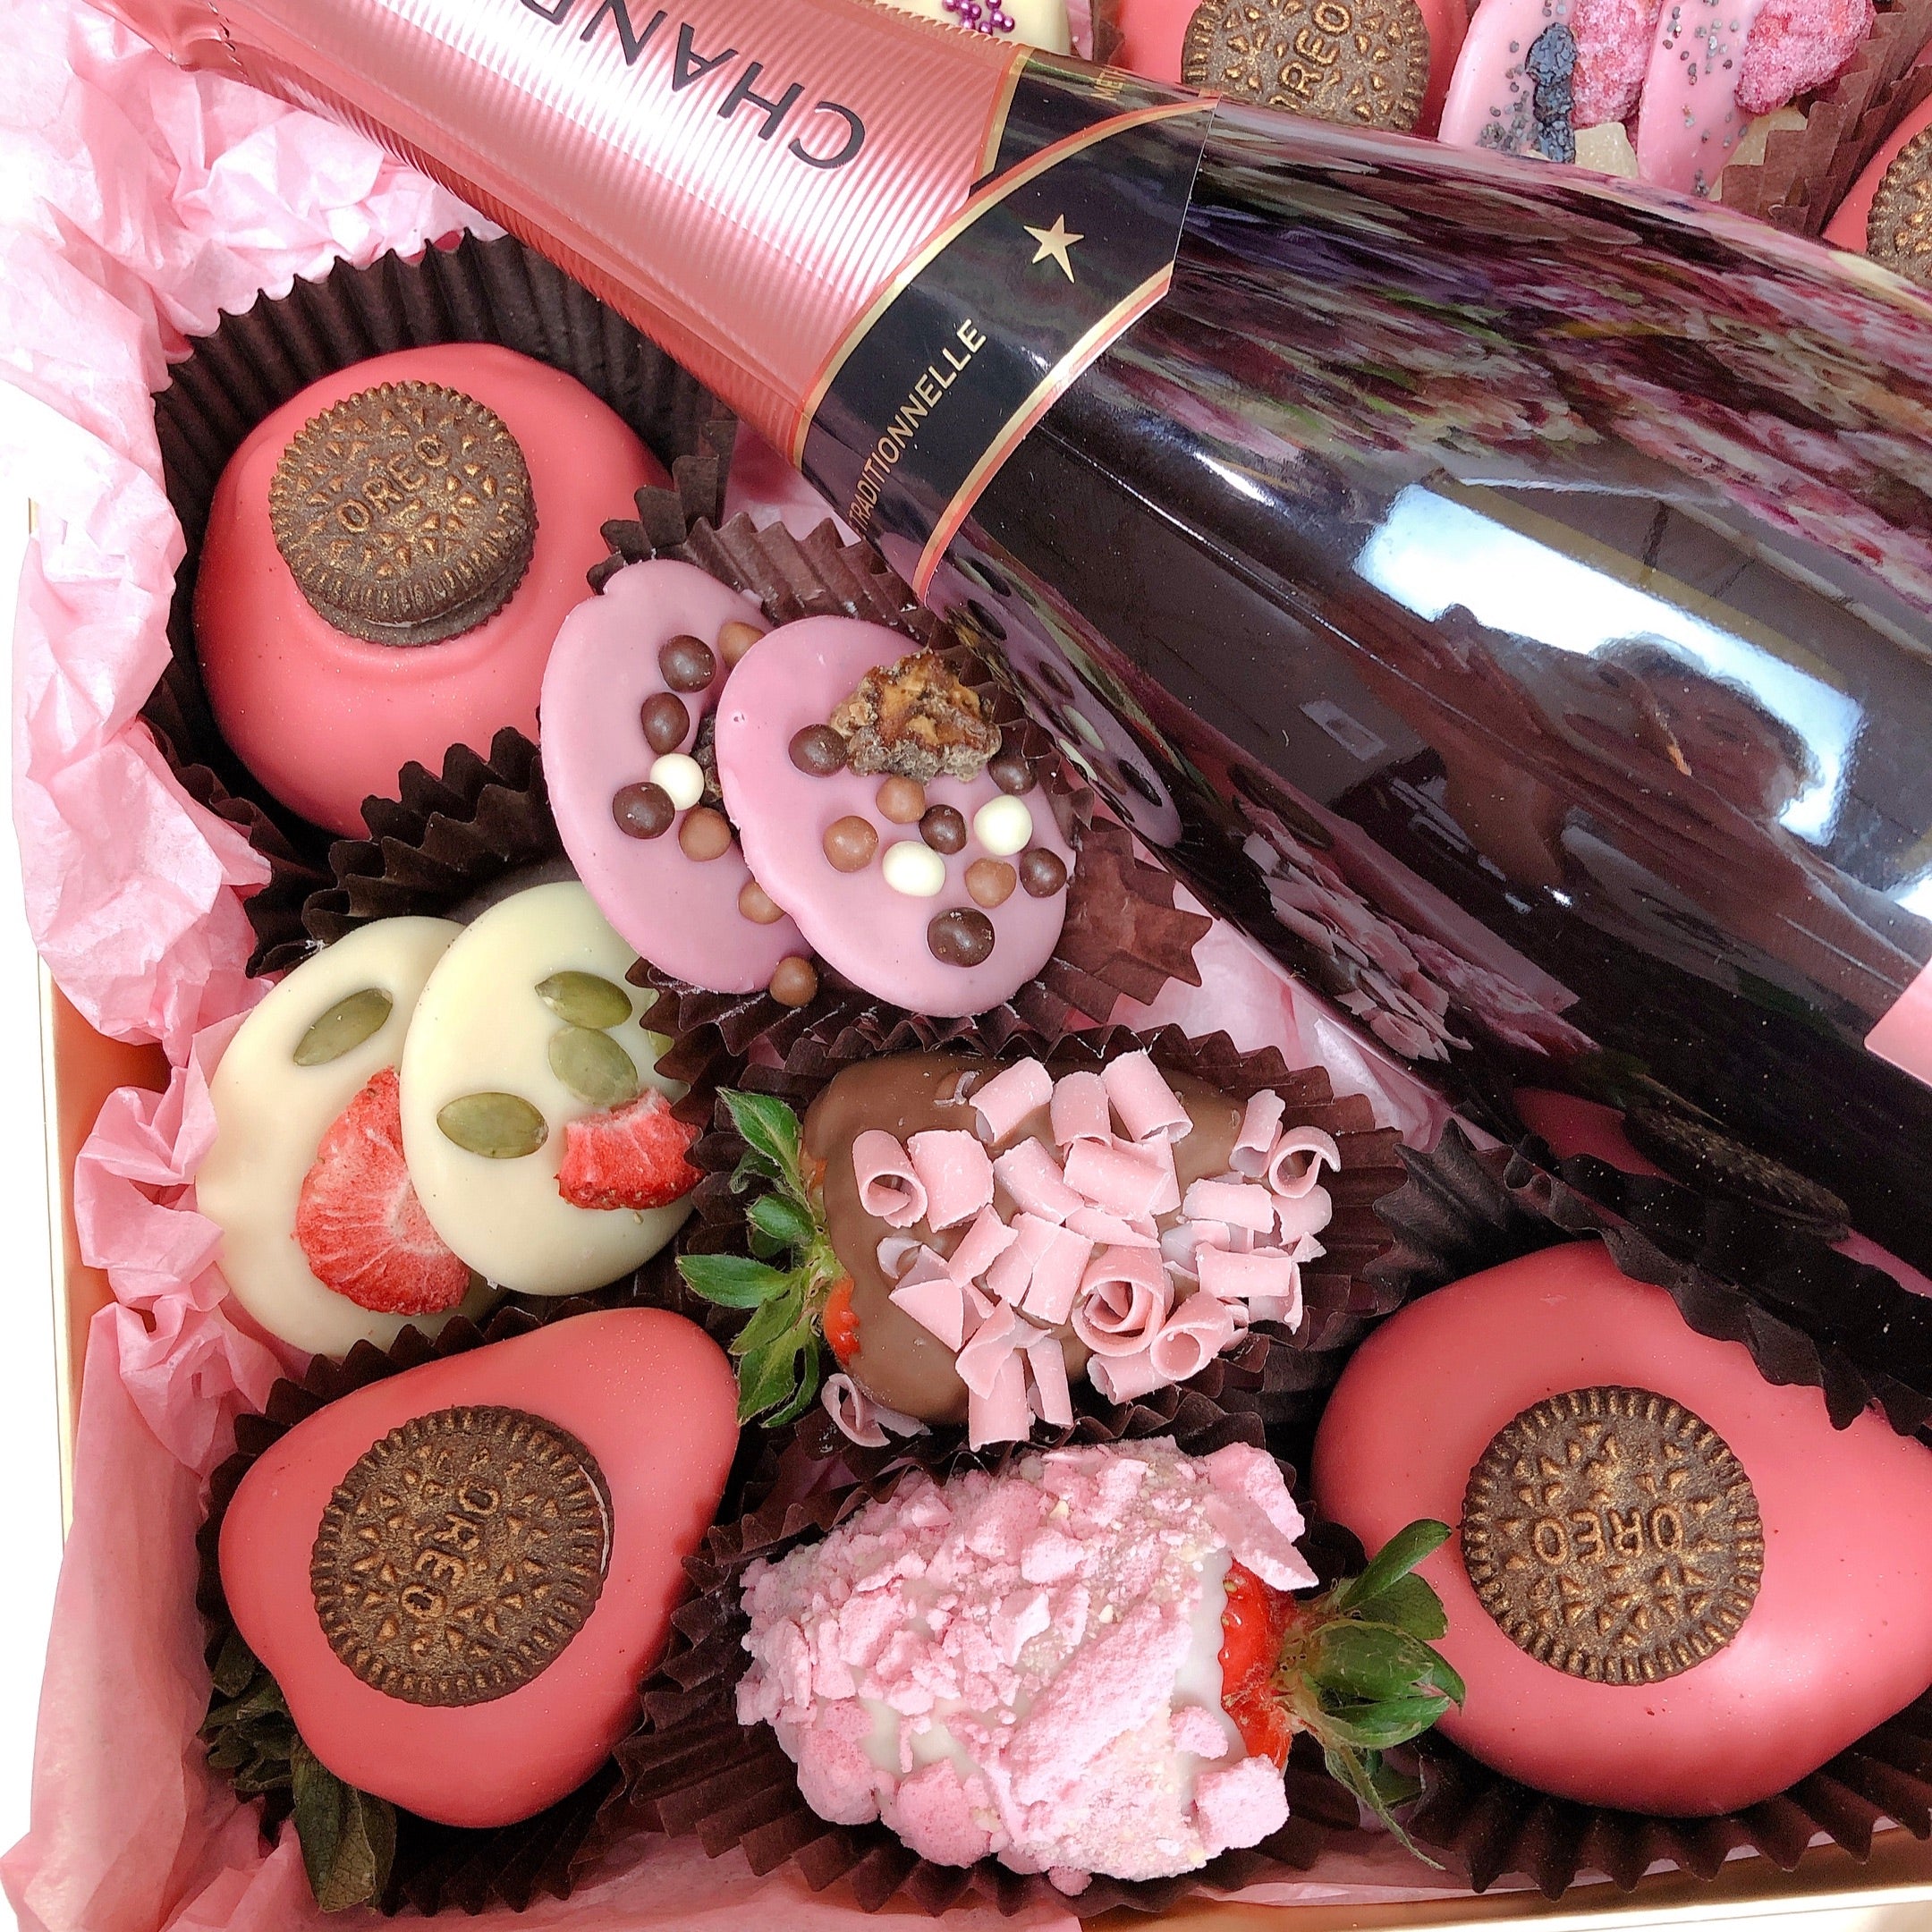 chandon Champagne hamper with chocolate coveredpd strawberries and mini doughnuts in a gift box